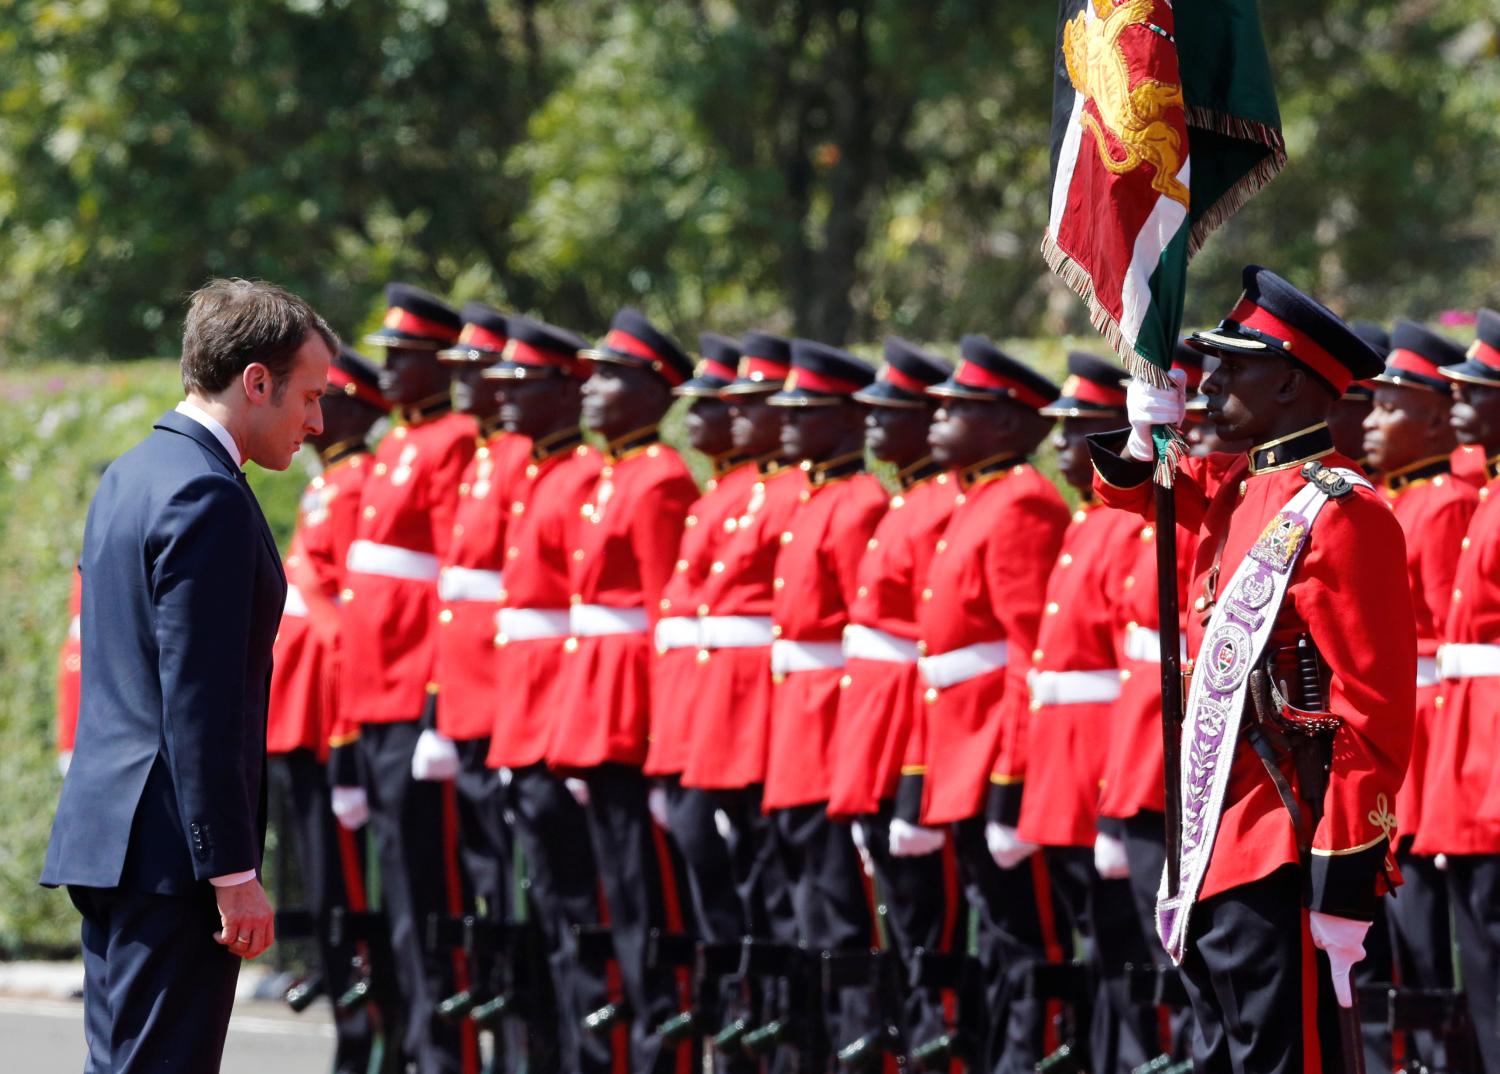 French President Emmanuel Macron inspects a guard of honour by the Kenya Defence Forces at State House in Nairobi, Kenya March 13, 2019. REUTERS/Thomas Mukoya - RC135F2FDDE0